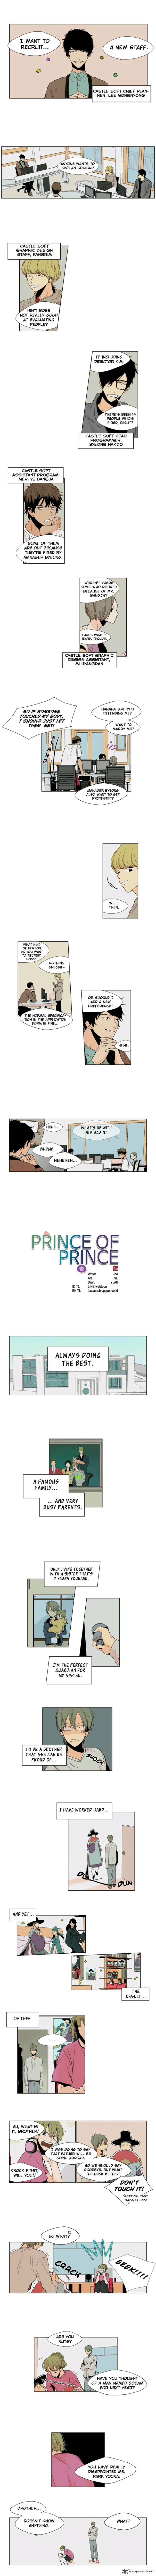 Prince Of Prince Chapter 4 Page 1